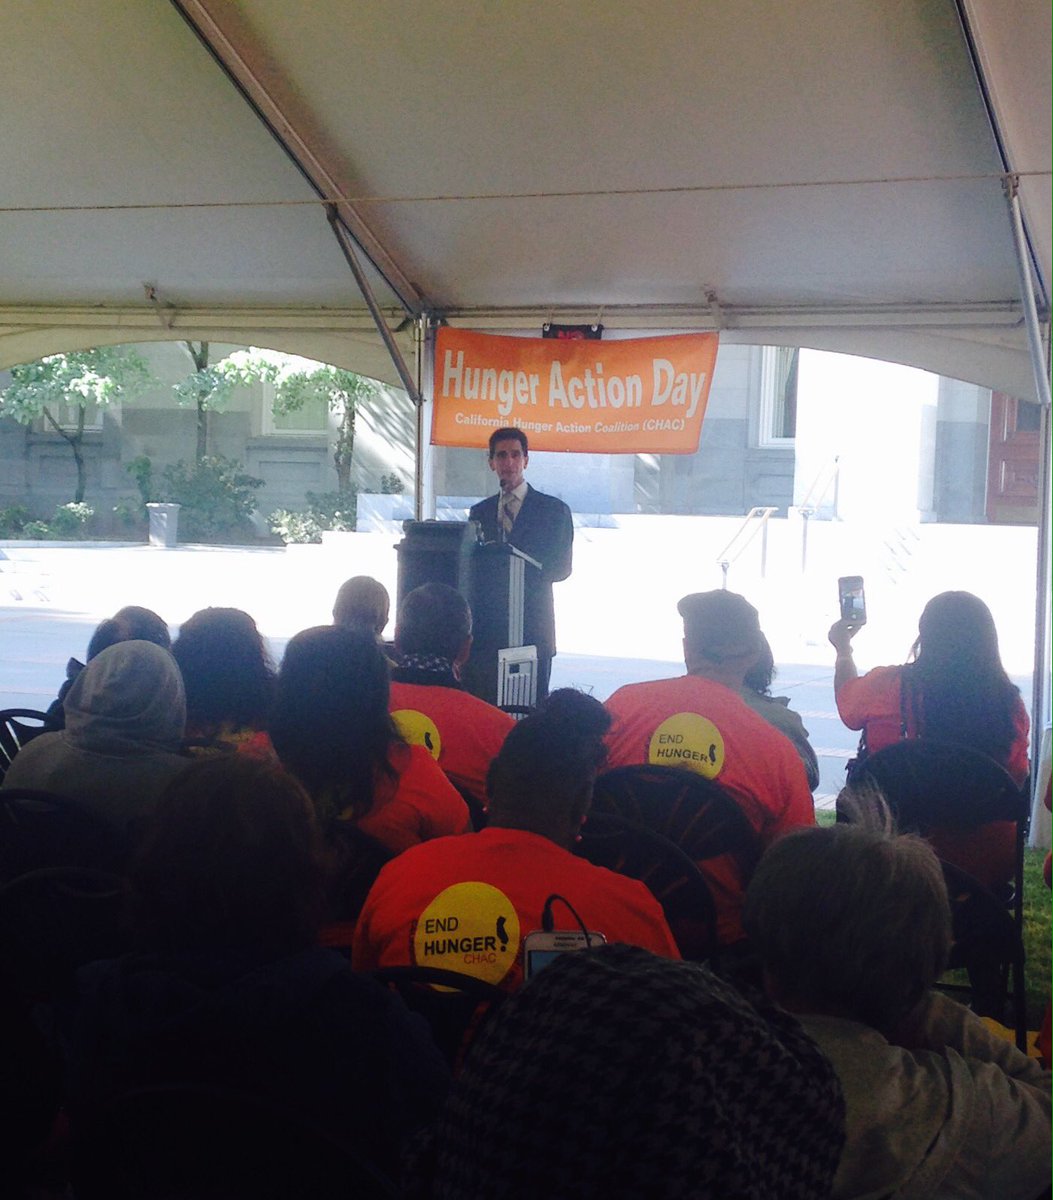 .@MarkLeno telling us to 'Stay strong and stay committed!' to ending hunger in CA! #hungeractionday